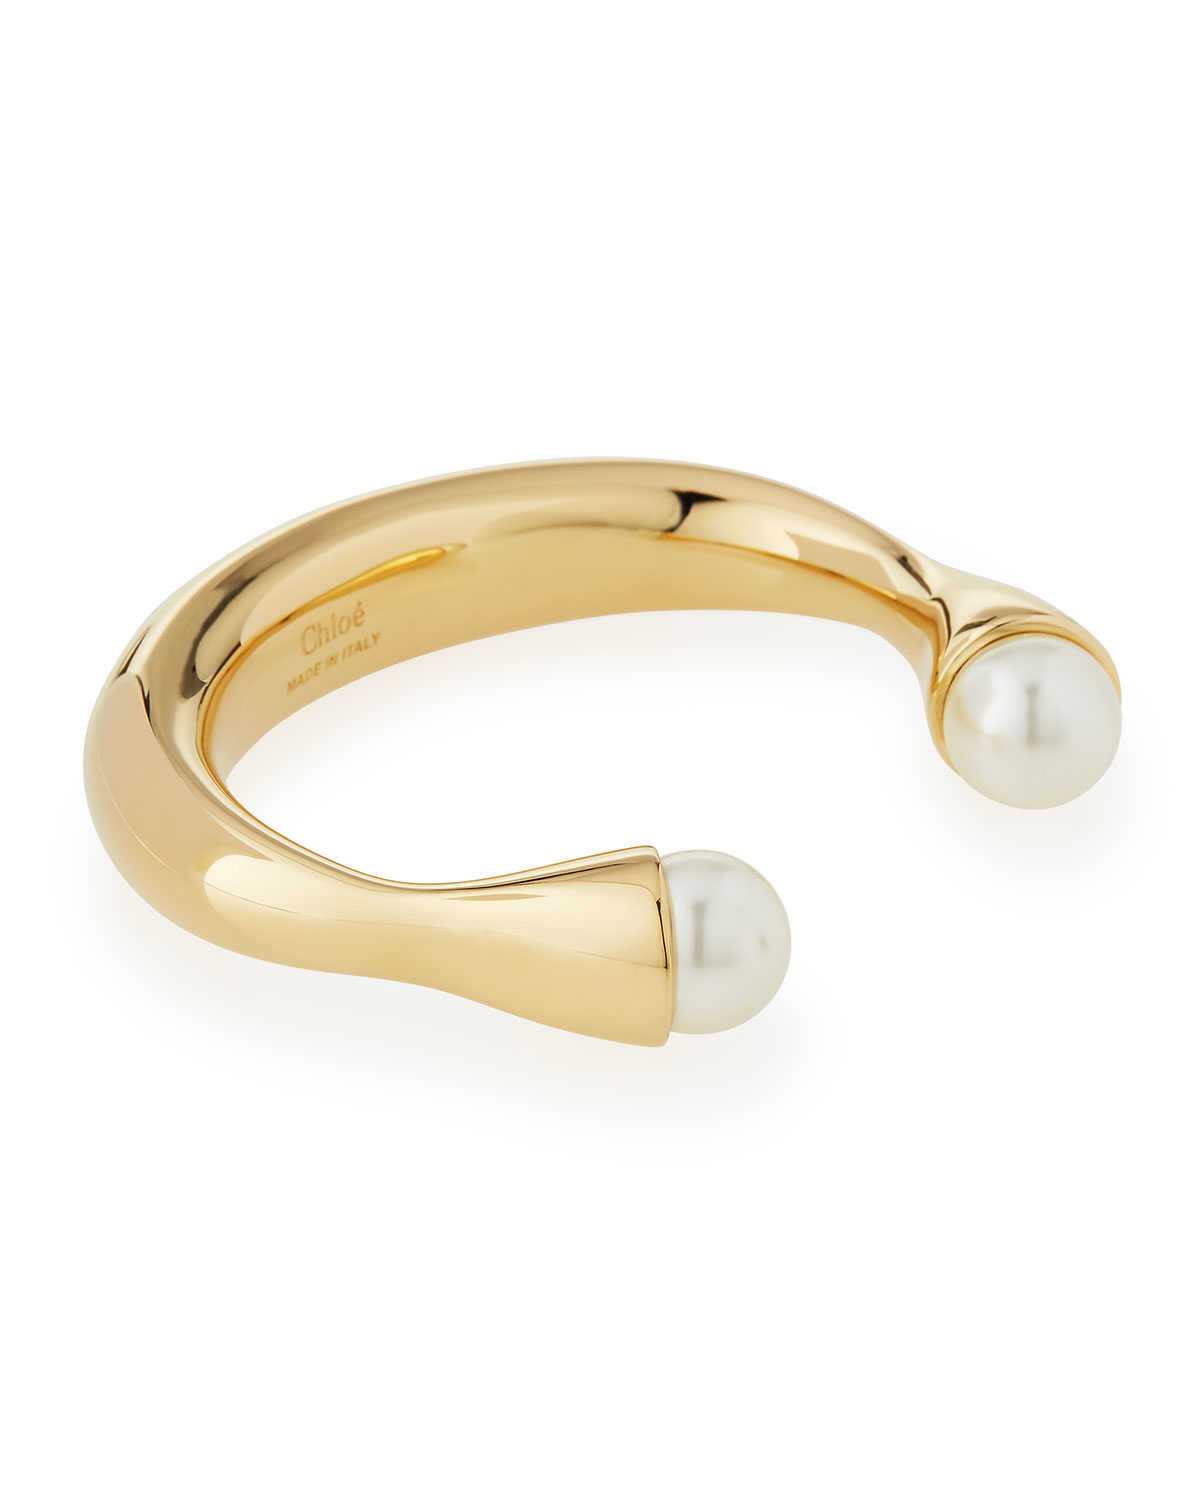 Chloé Darcey Pearly Cuff Bracelet in White | Lyst